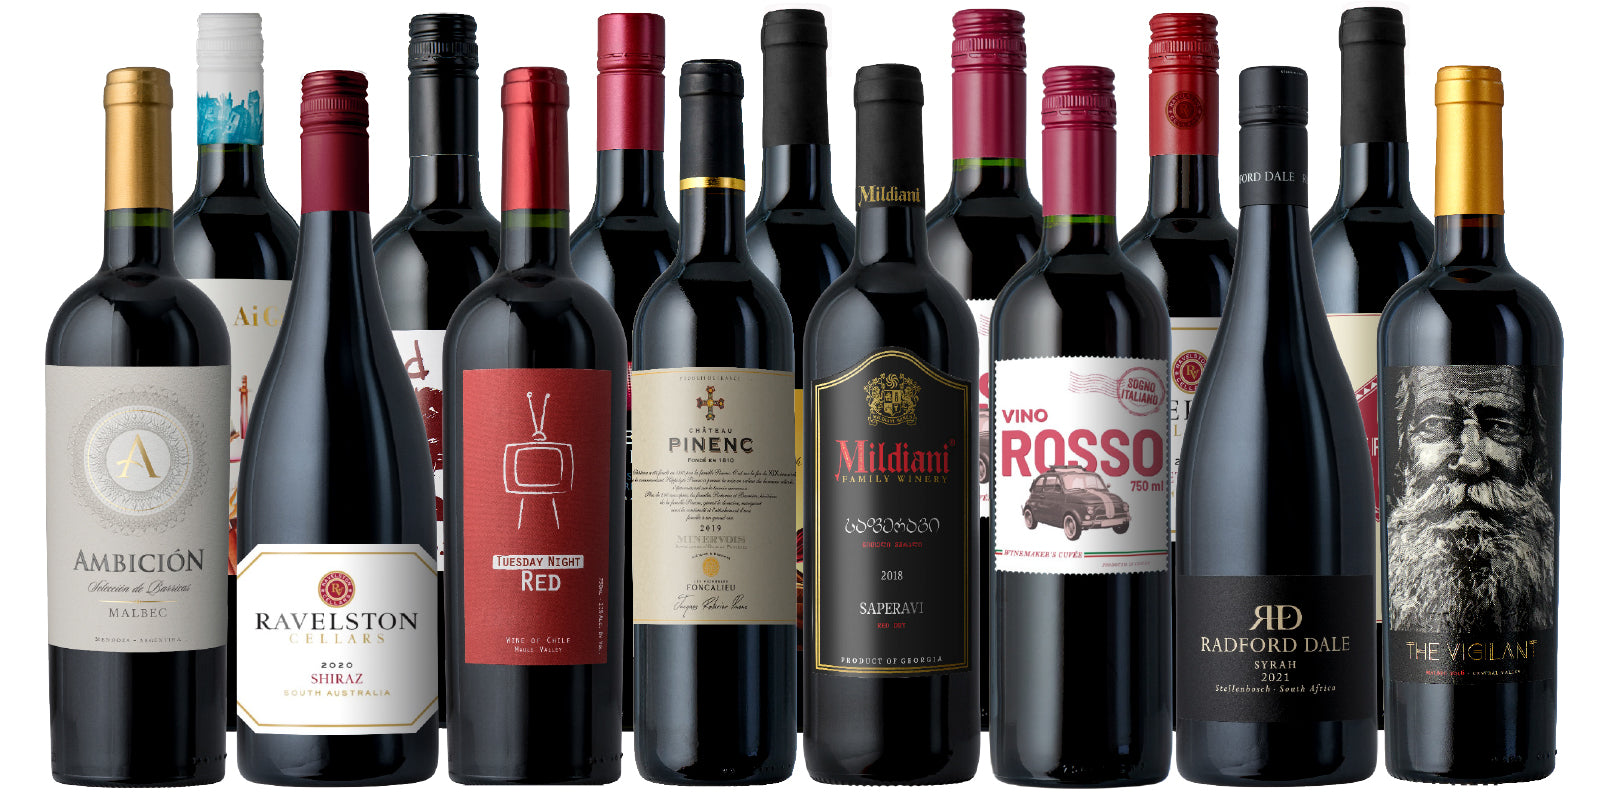 UPGRADE: The Wide World of Red Wine Vineyard 15-Pack